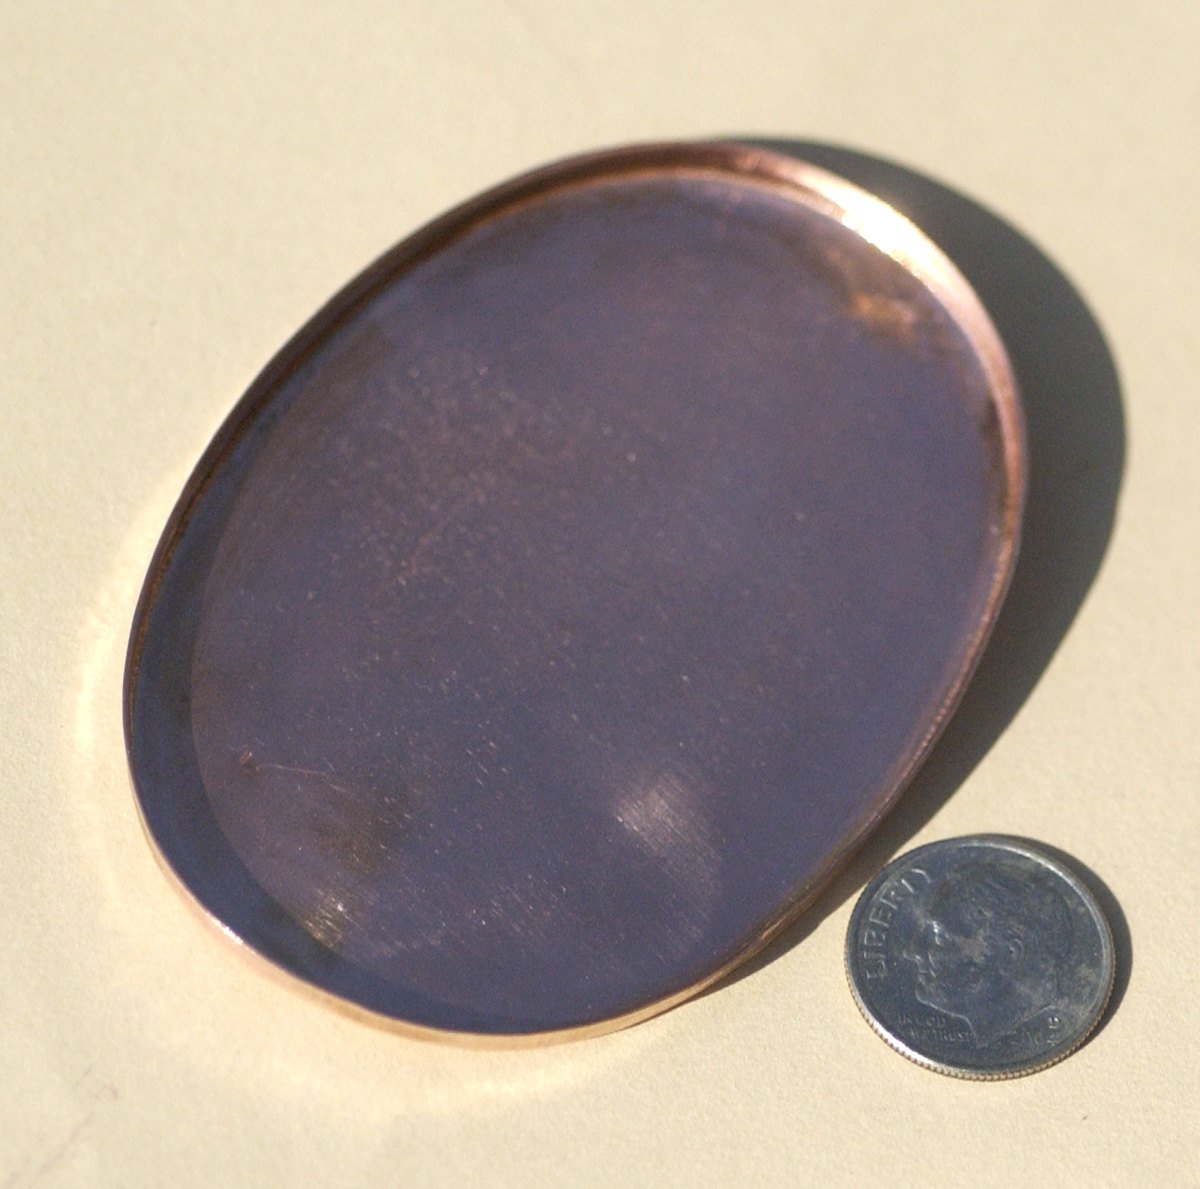 Oval Bezel Cups - 50mm x 70mm Blanks Outside Dimension, 4mm tall for Enameling